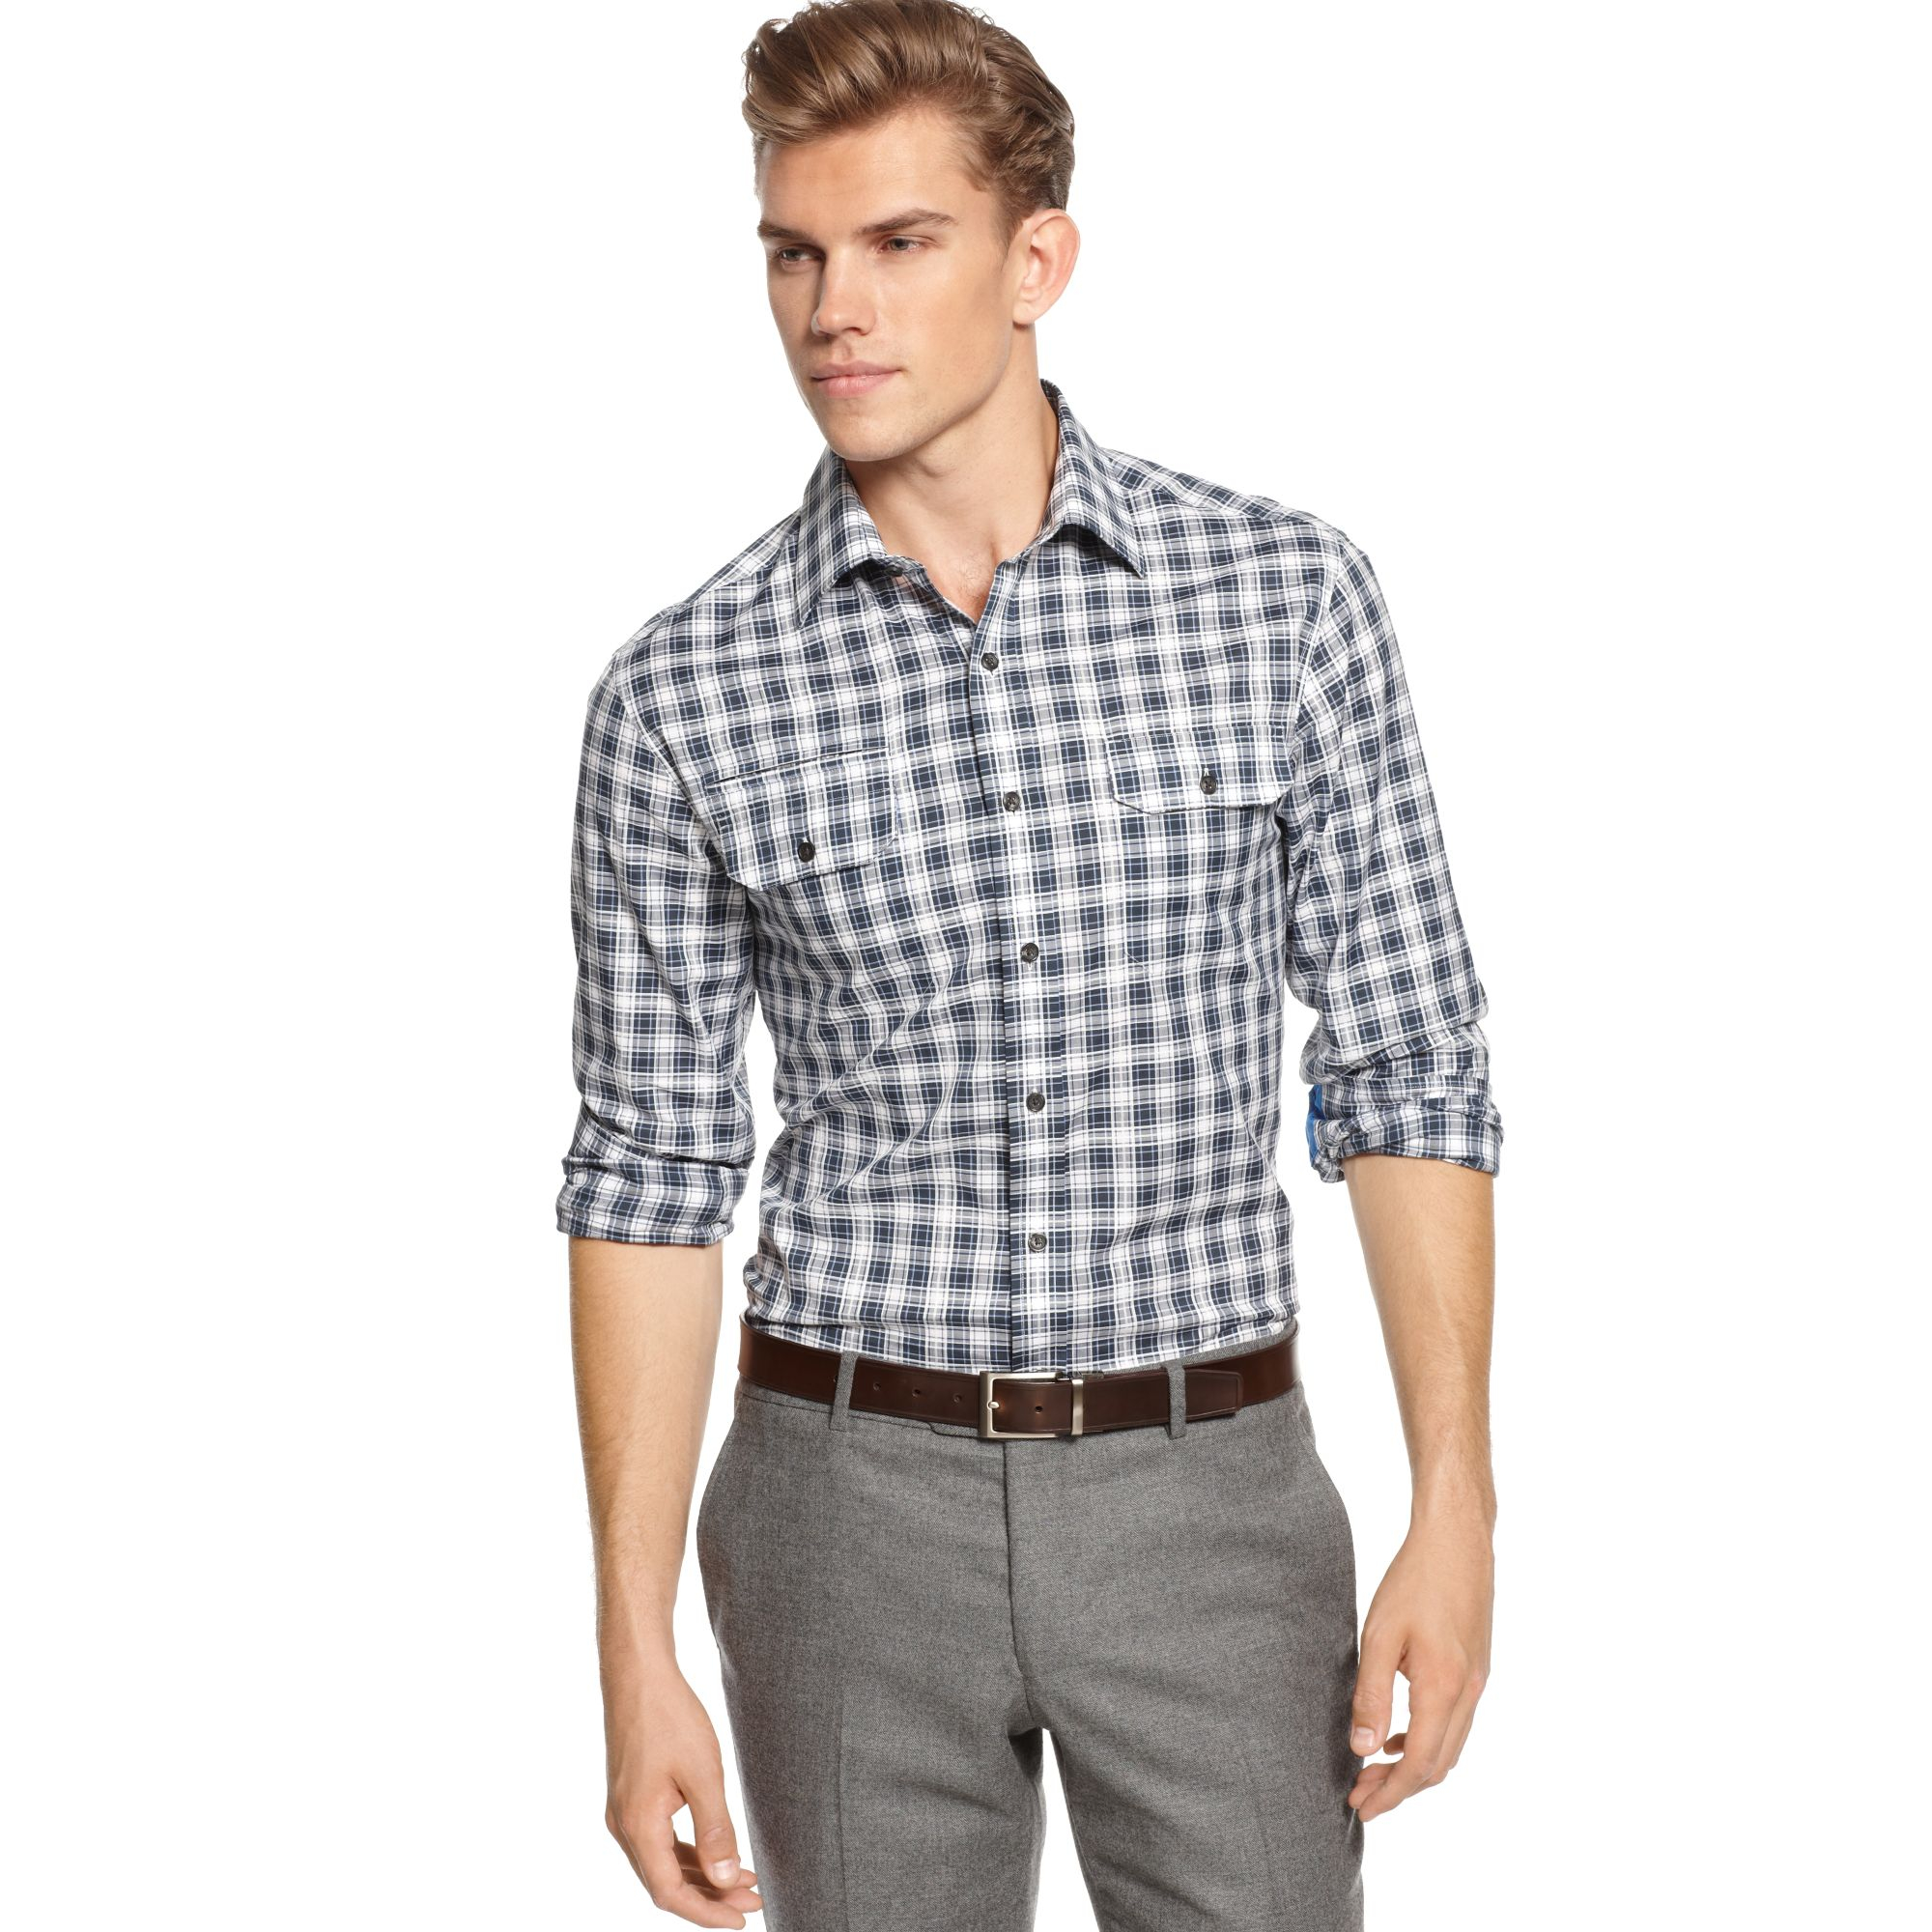 Download Lyst - Vince Camuto Longsleeve Plaid Dress Shirt in Blue ...